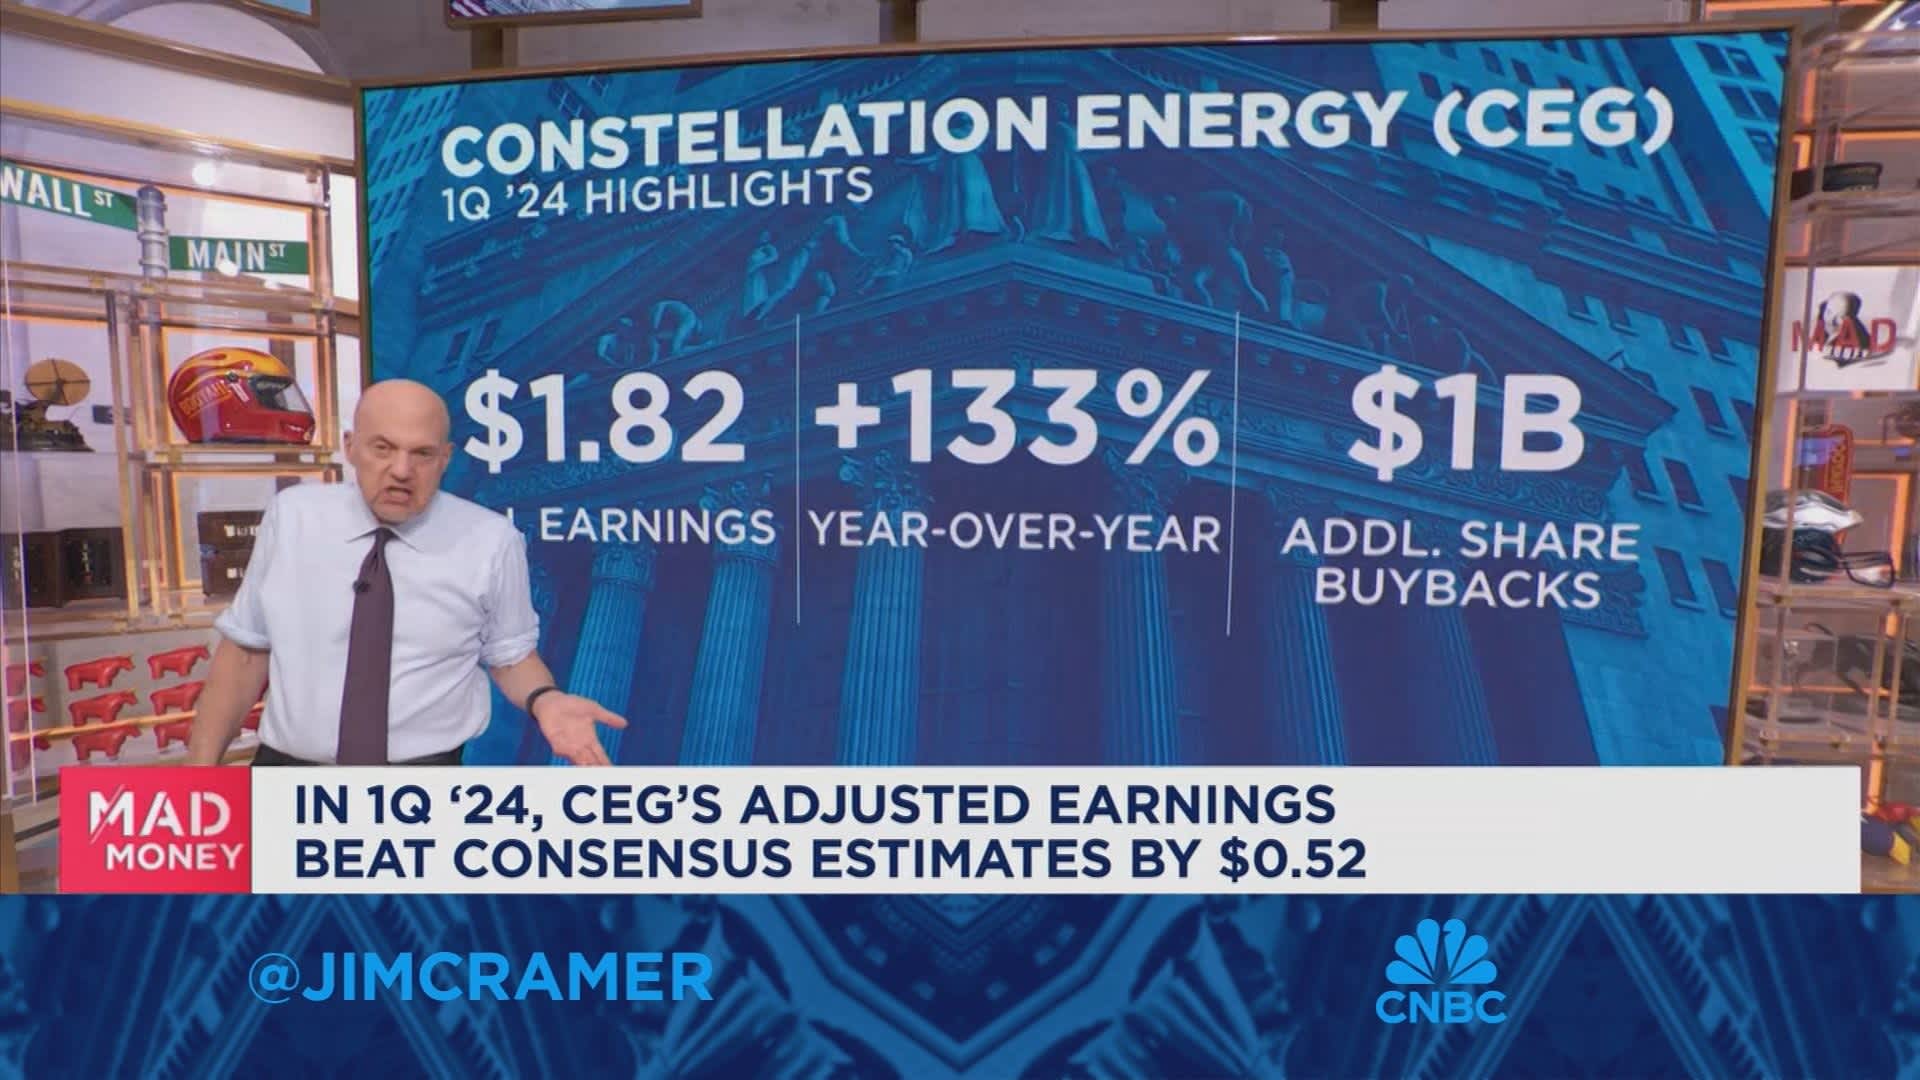 I’ve been recommending Constellation Energy practically the whole way, says Jim Cramer [Video]